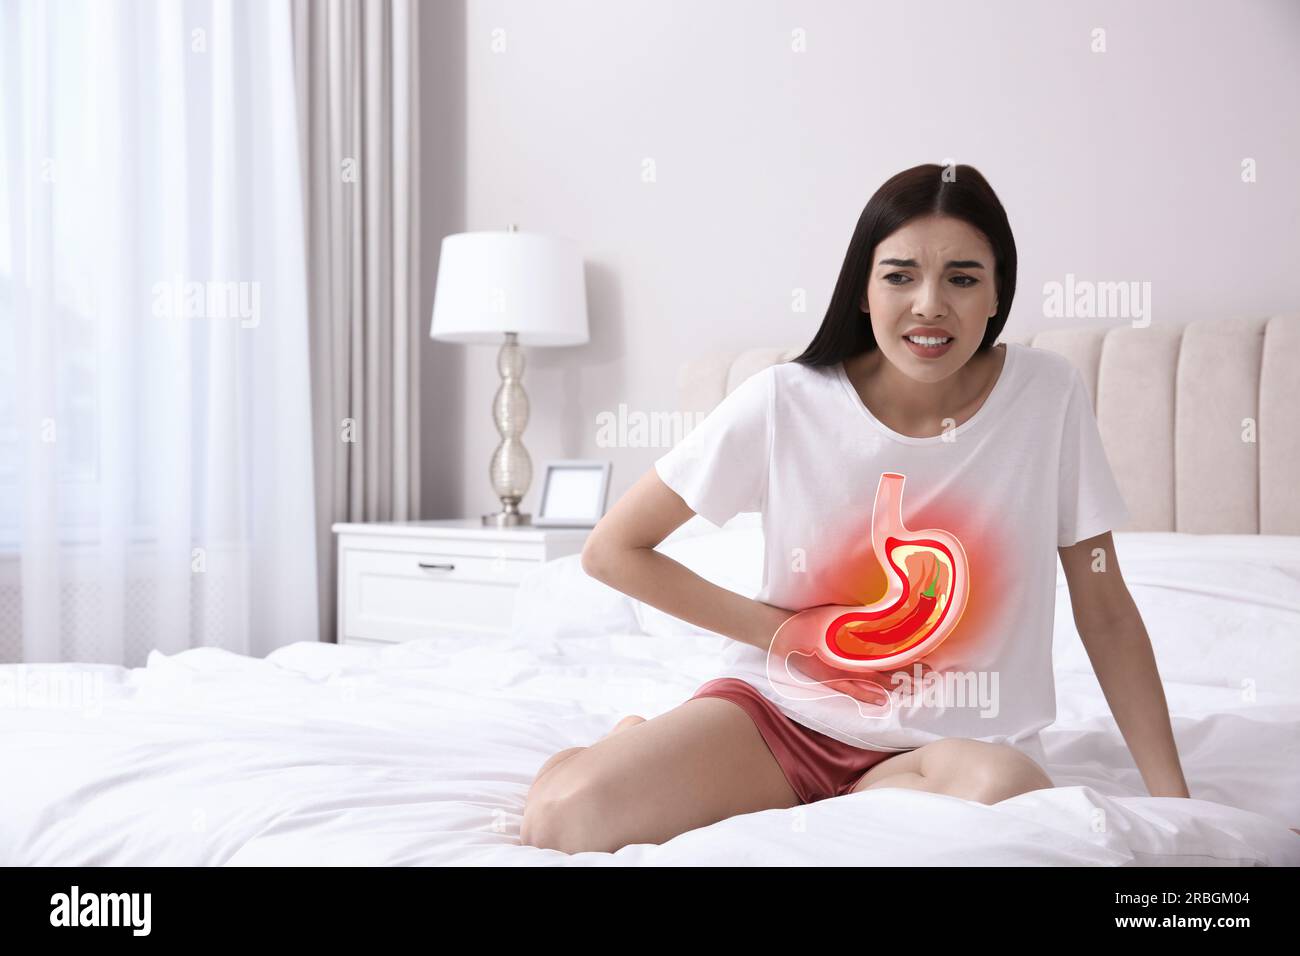 Woman suffering from heartburn at home. Stomach with hot chili pepper symbolizing acid indigestion, illustration Stock Photo